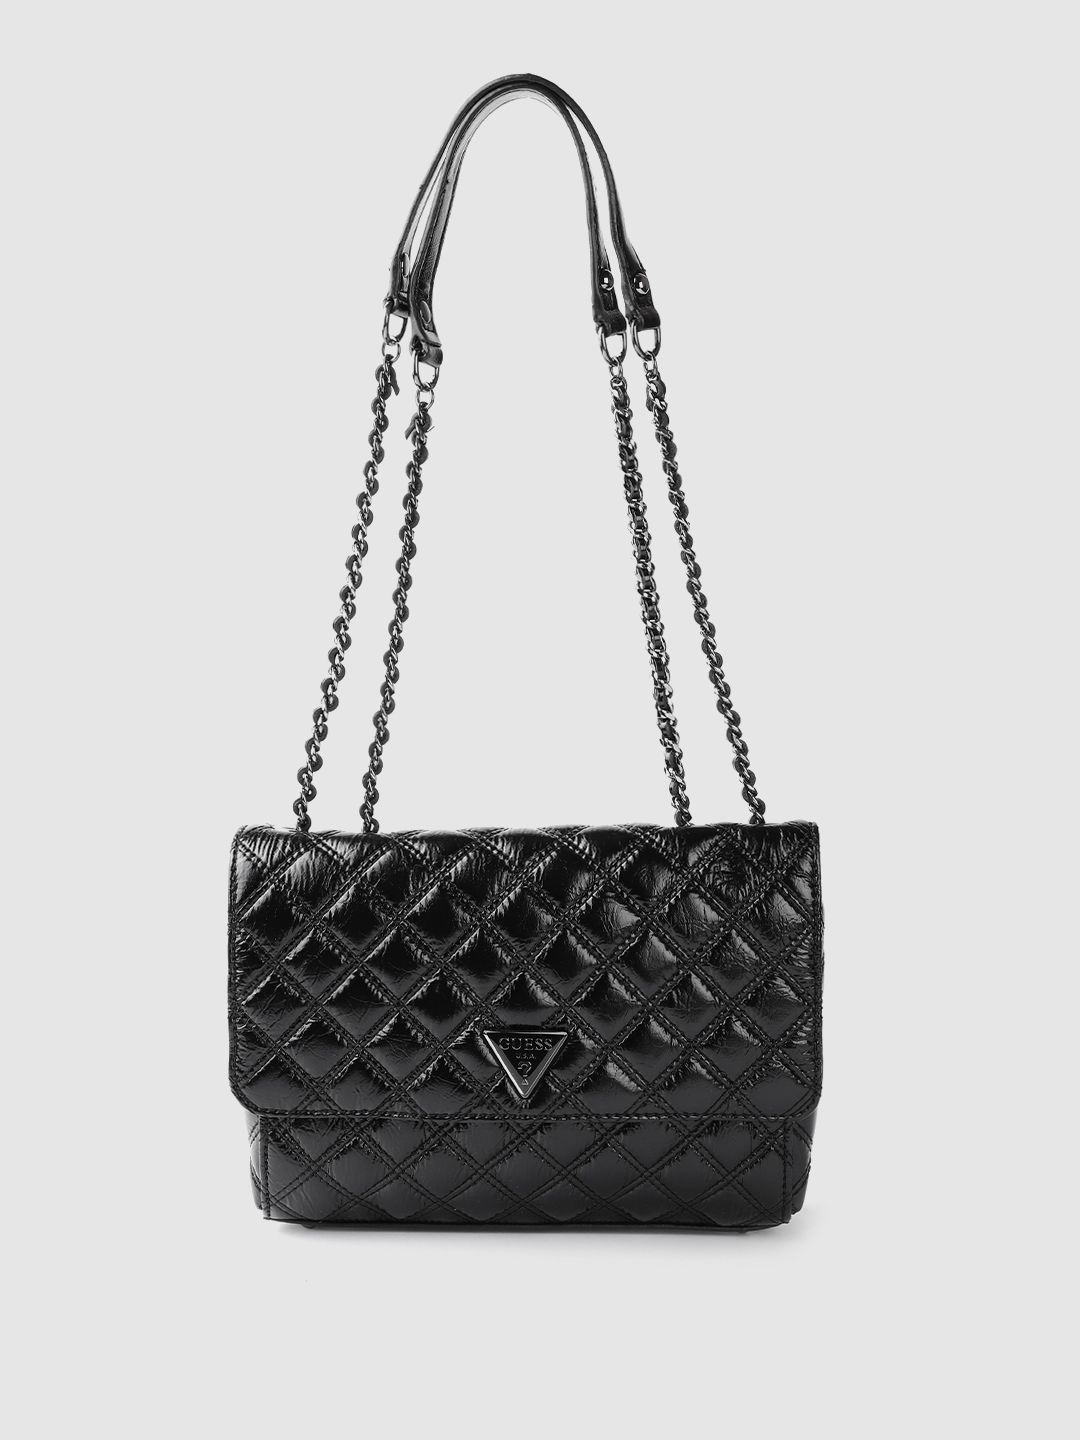 GUESS Black Quilted Shoulder Bag Price in India